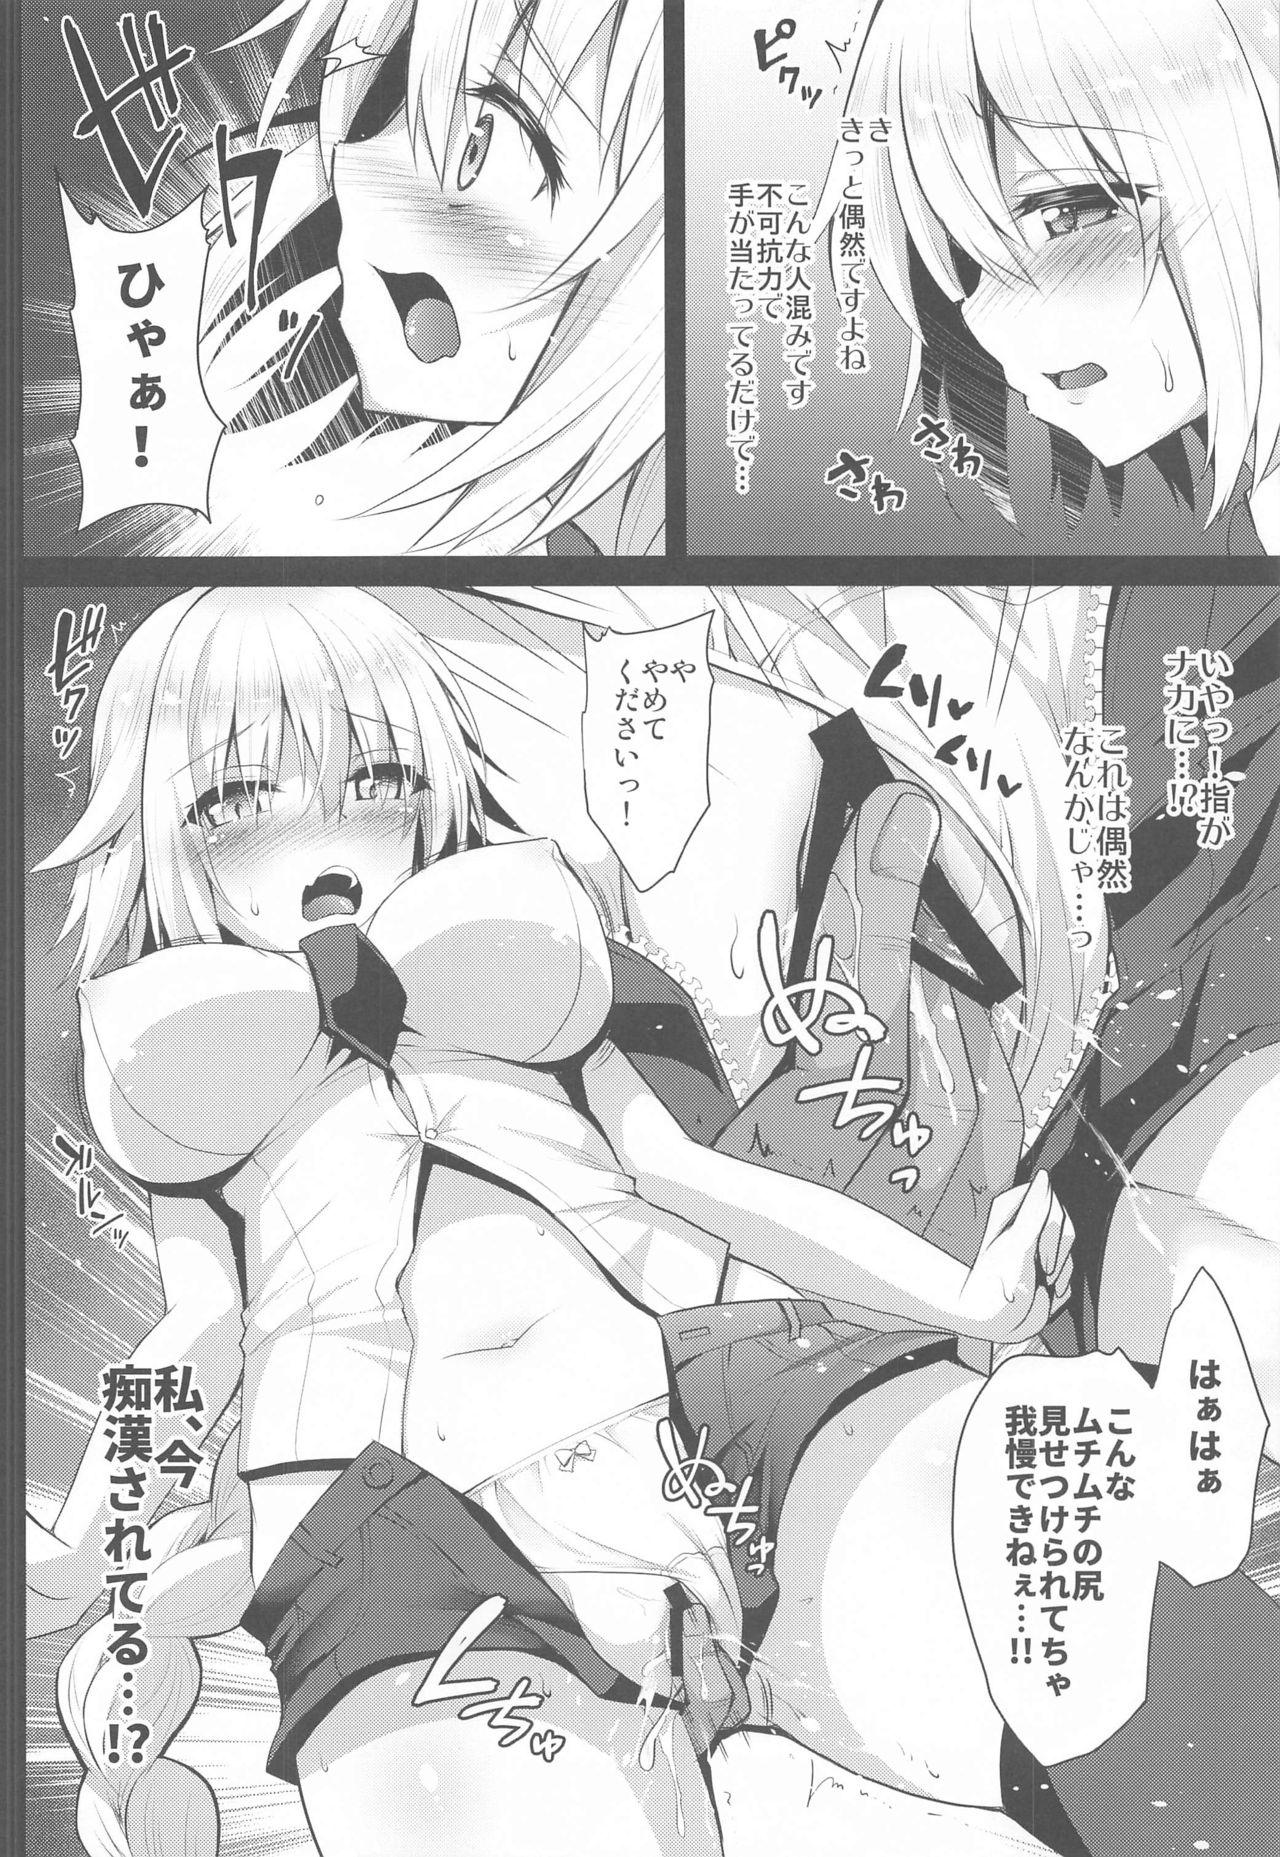 Freaky Chikan Densha Jeanne - Fate grand order Missionary Position Porn - Page 5